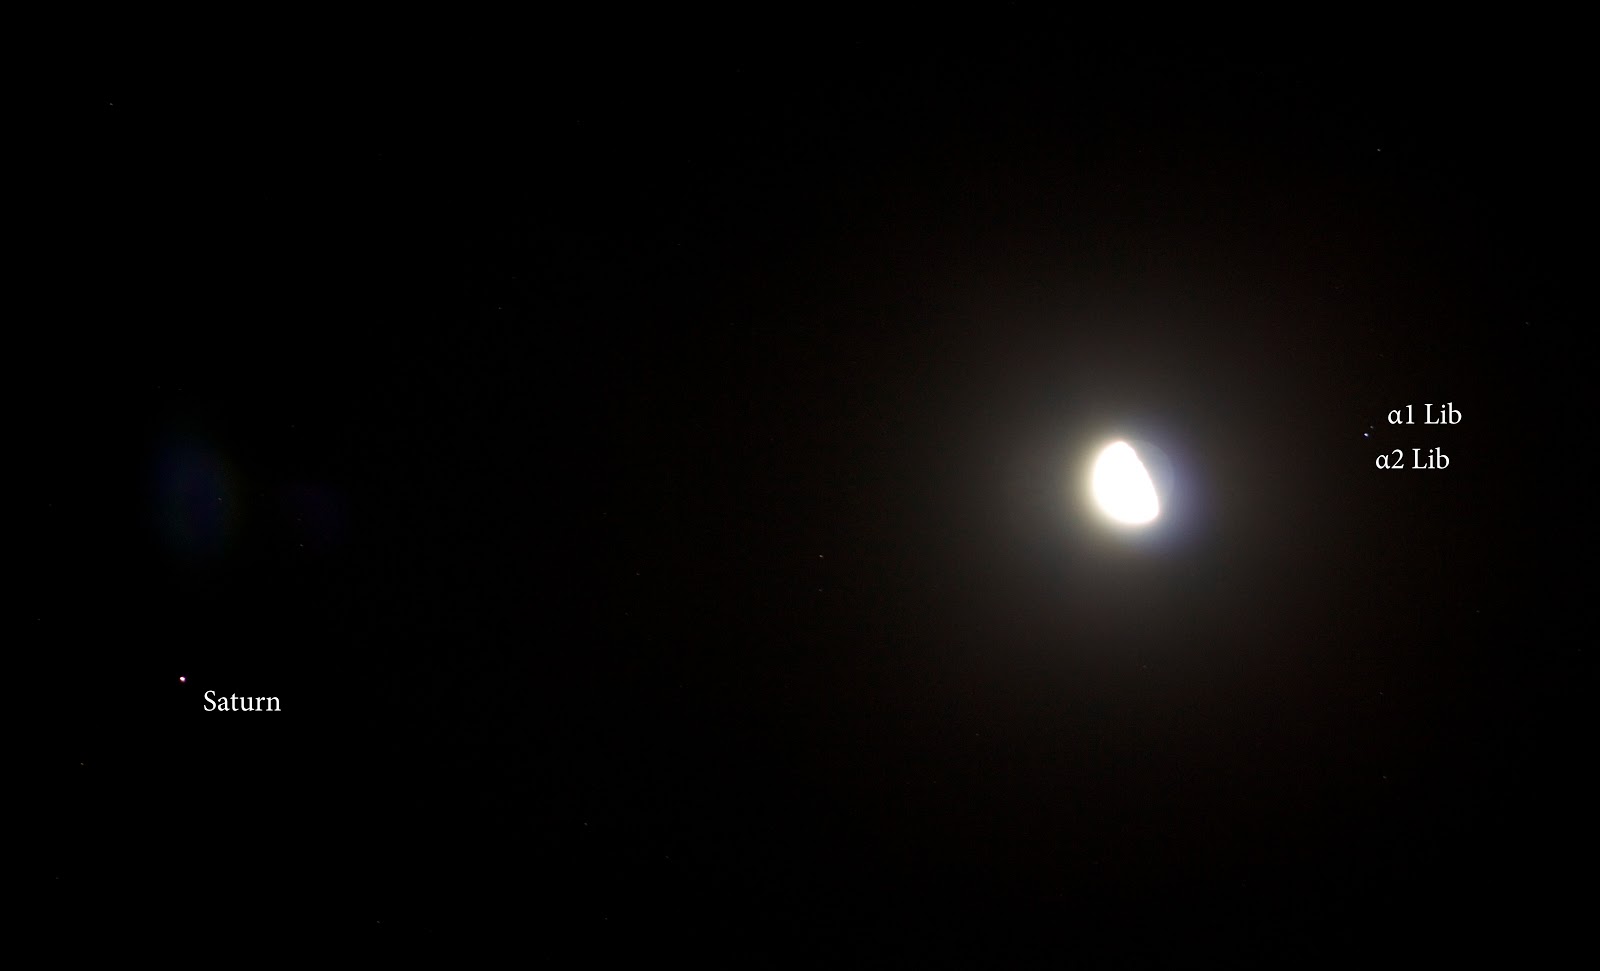 Third Quarter Moon with Saturn and Alpha Librae